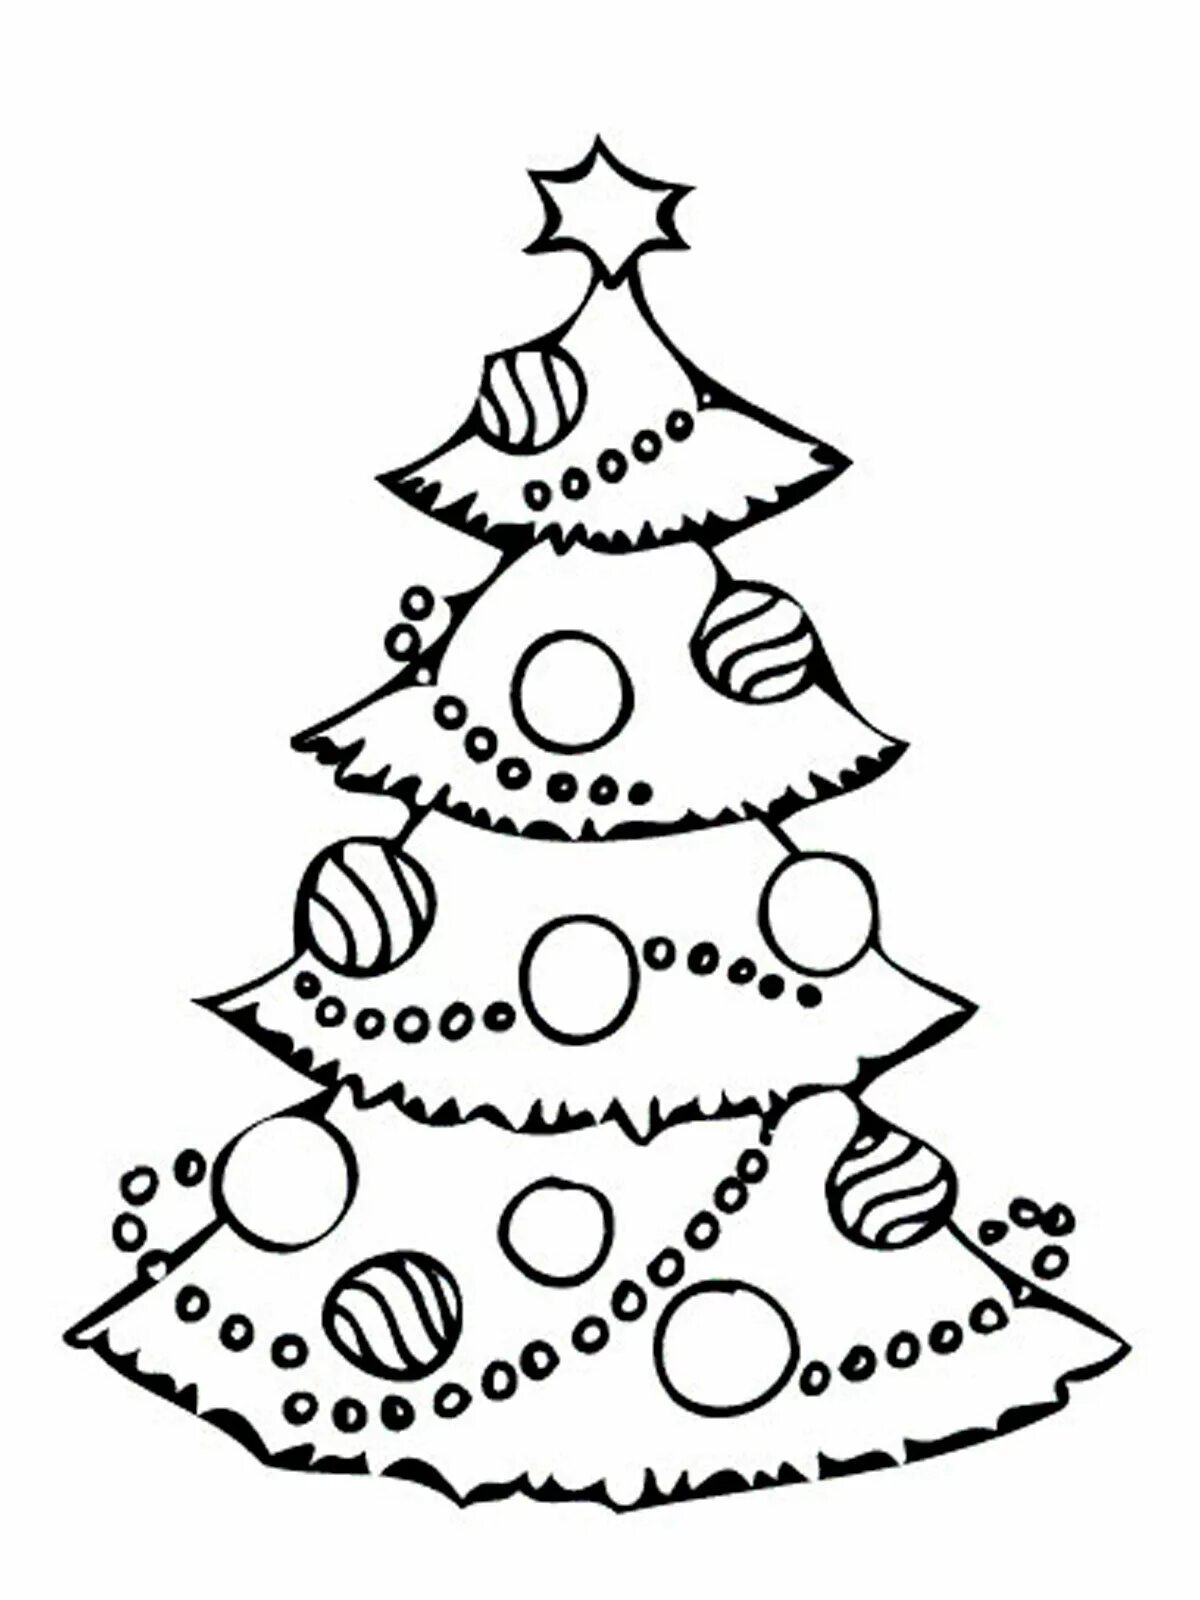 Christmas tree coloring page with crazy colors for kids